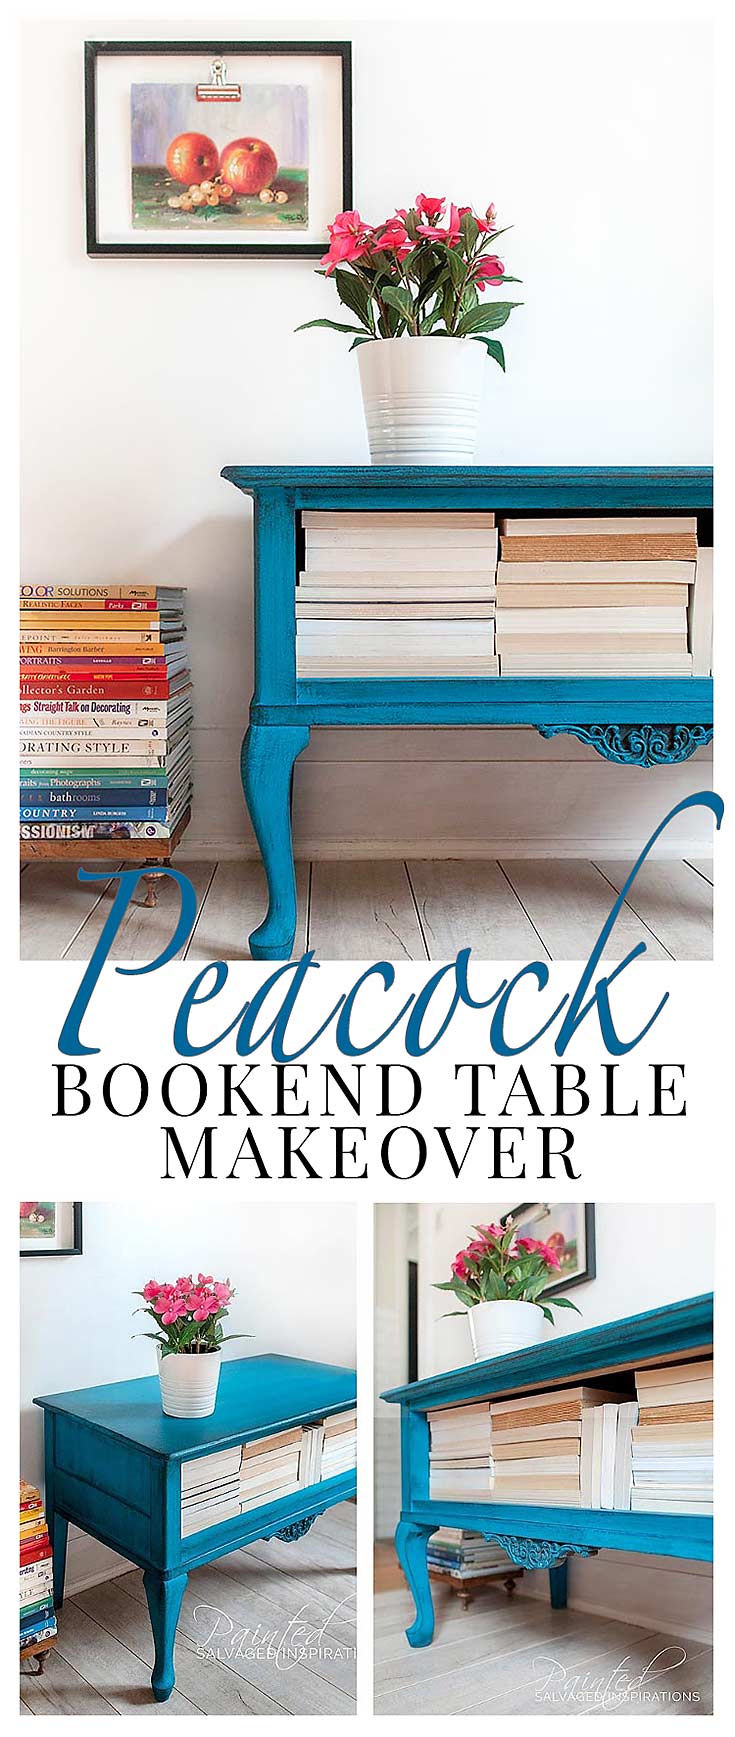 Peacock Bookend Table Makeover